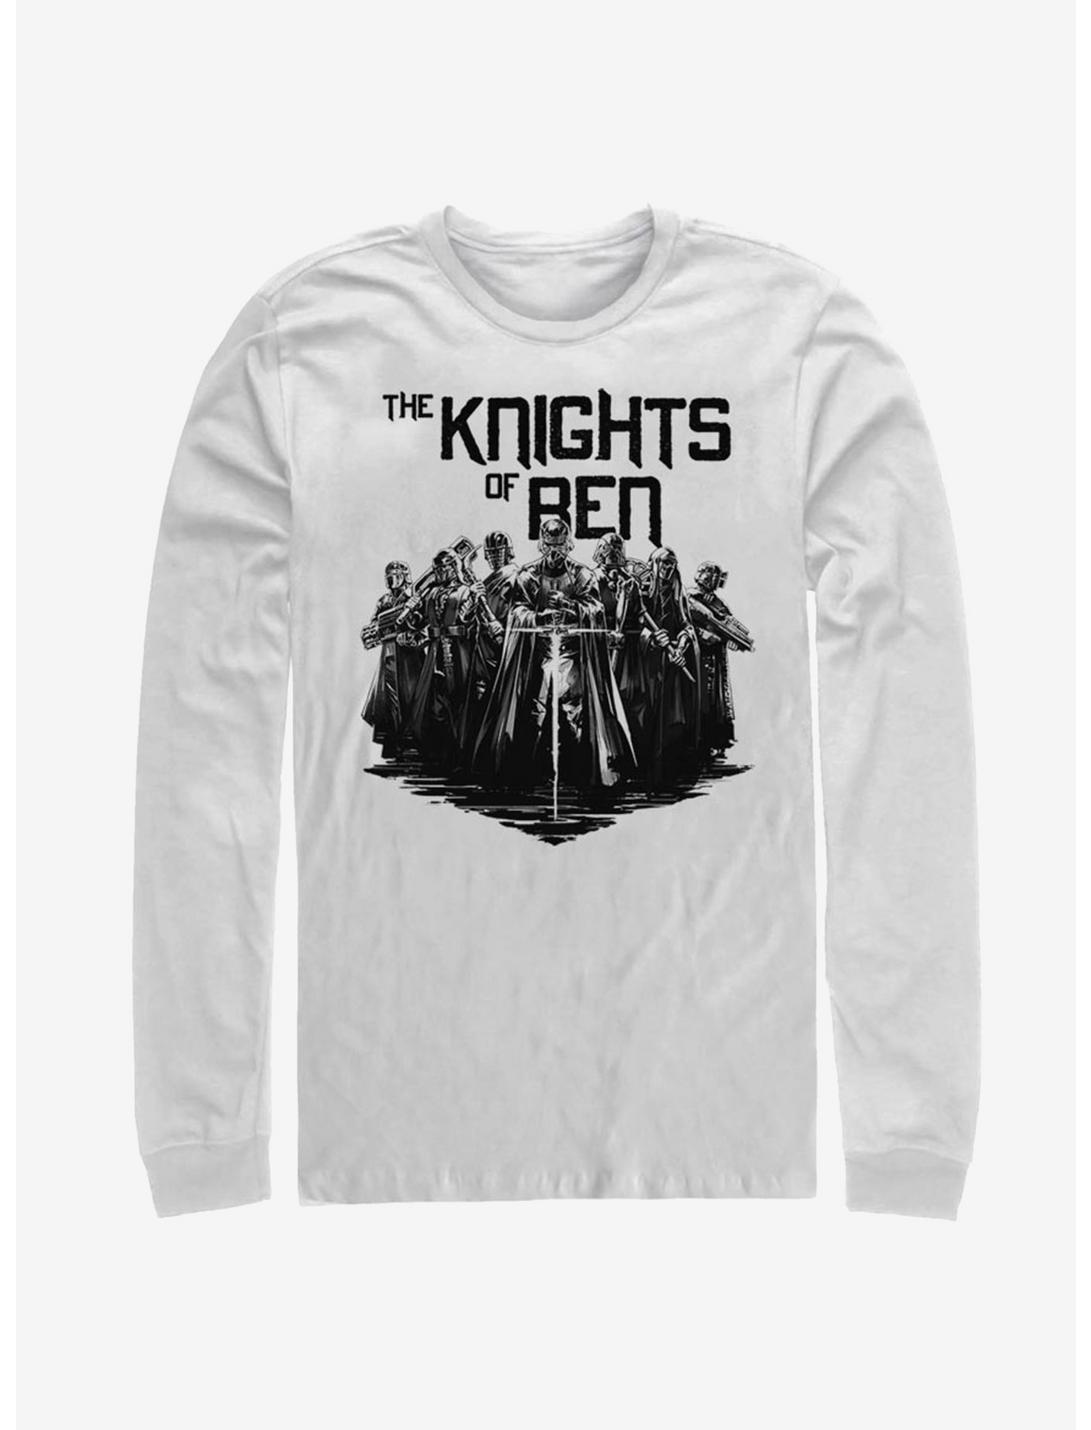 Star Wars Episode IX The Rise Of Skywalker Inked Knights Long-Sleeve T-Shirt, WHITE, hi-res